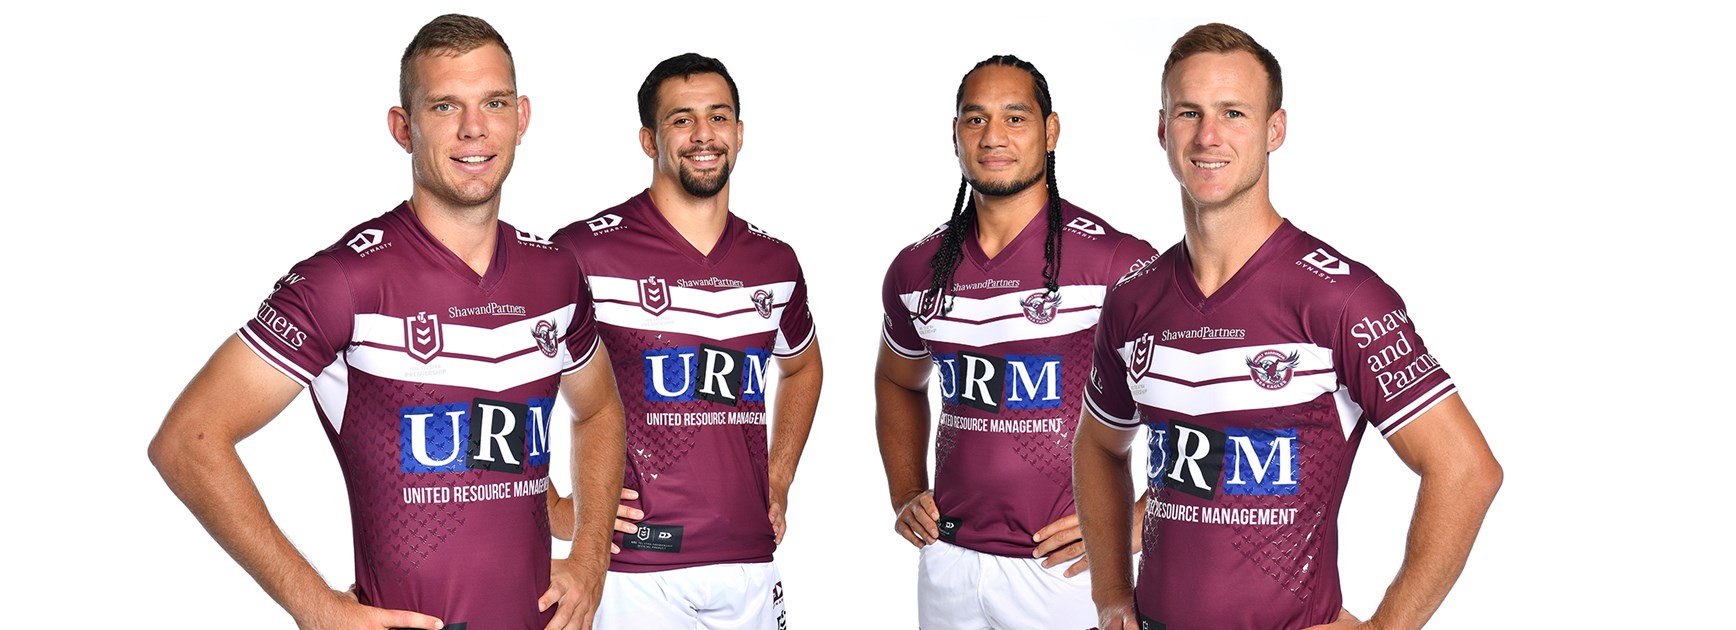 ELMO Match Preview: Sea Eagles vs Roosters